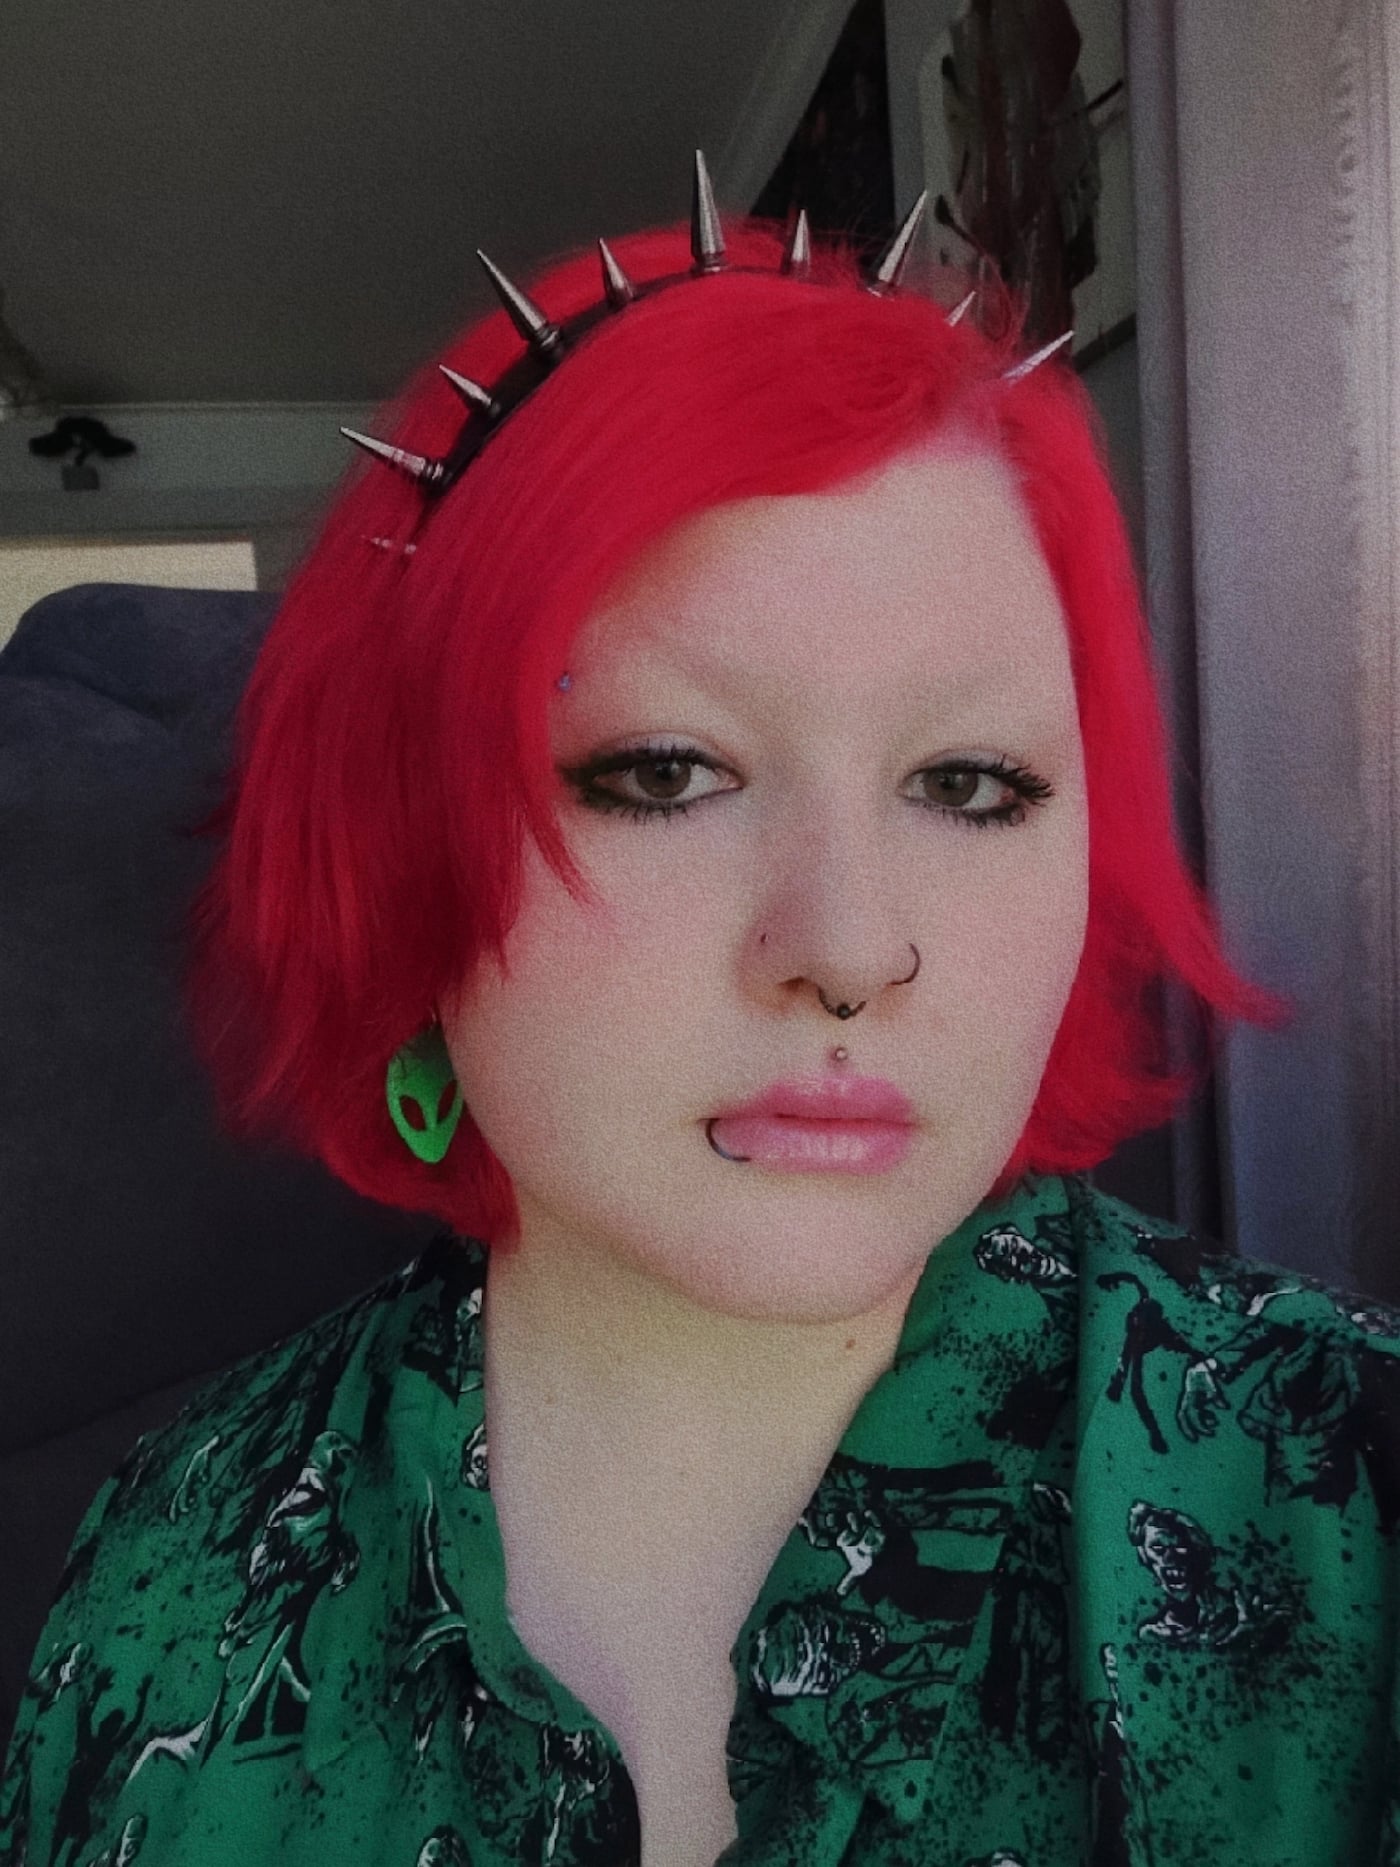 Lilly, a Yungblud fan, pictured with red hair and a spiky hairband.